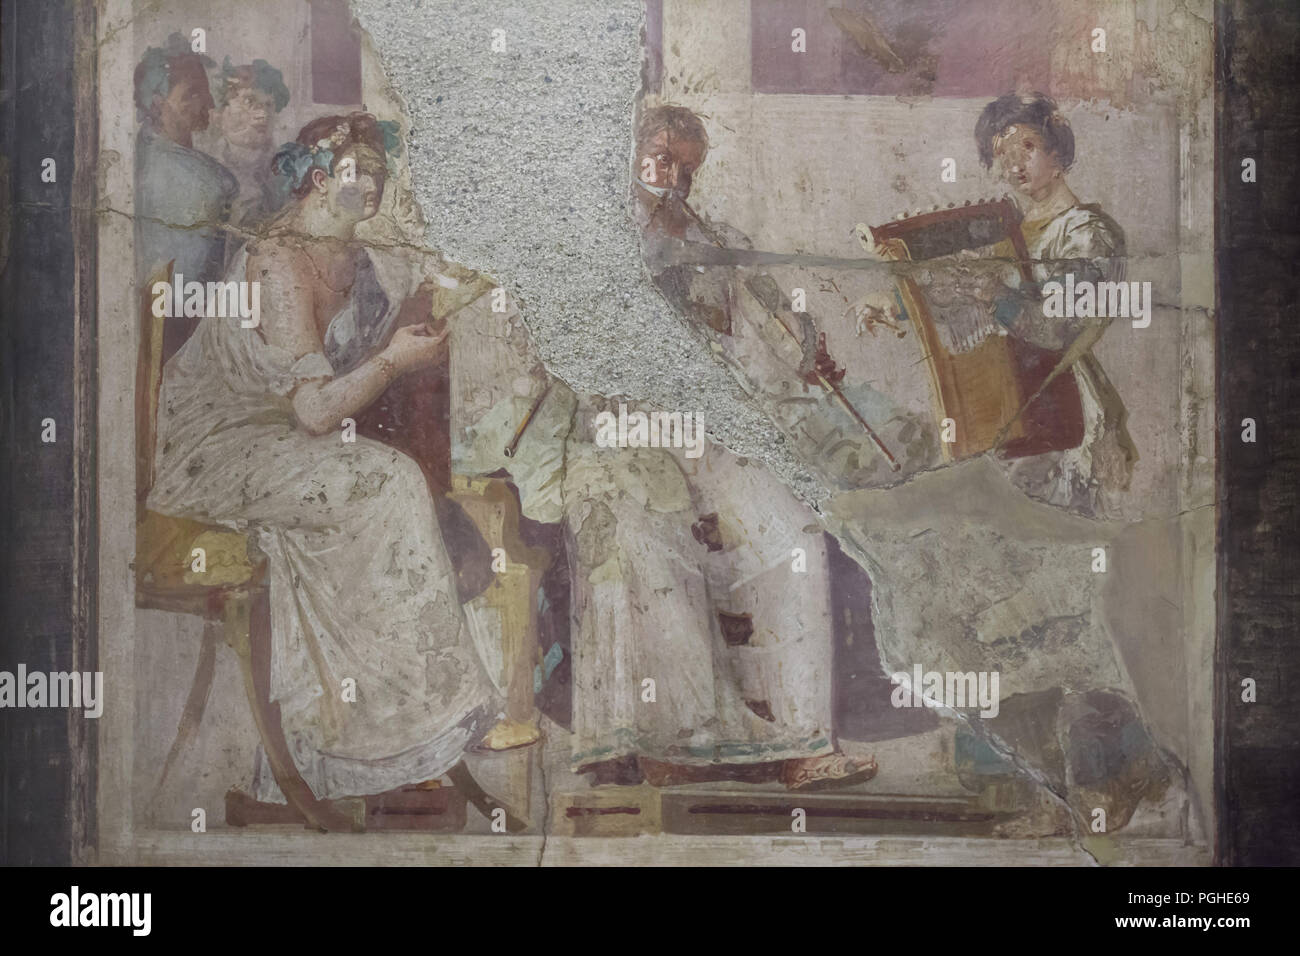 Ancient Roman musicians depicted in the Roman fresco from Herculaneum (1-79 AD), now on display in the National Archaeological Museum (Museo Archeologico Nazionale di Napoli) in Naples, Campania, Italy. Seated woman appears to be reading the musical score being played by the musicians on a tibia (Roman double flute) and a cithara (Roman lyre). Stock Photo